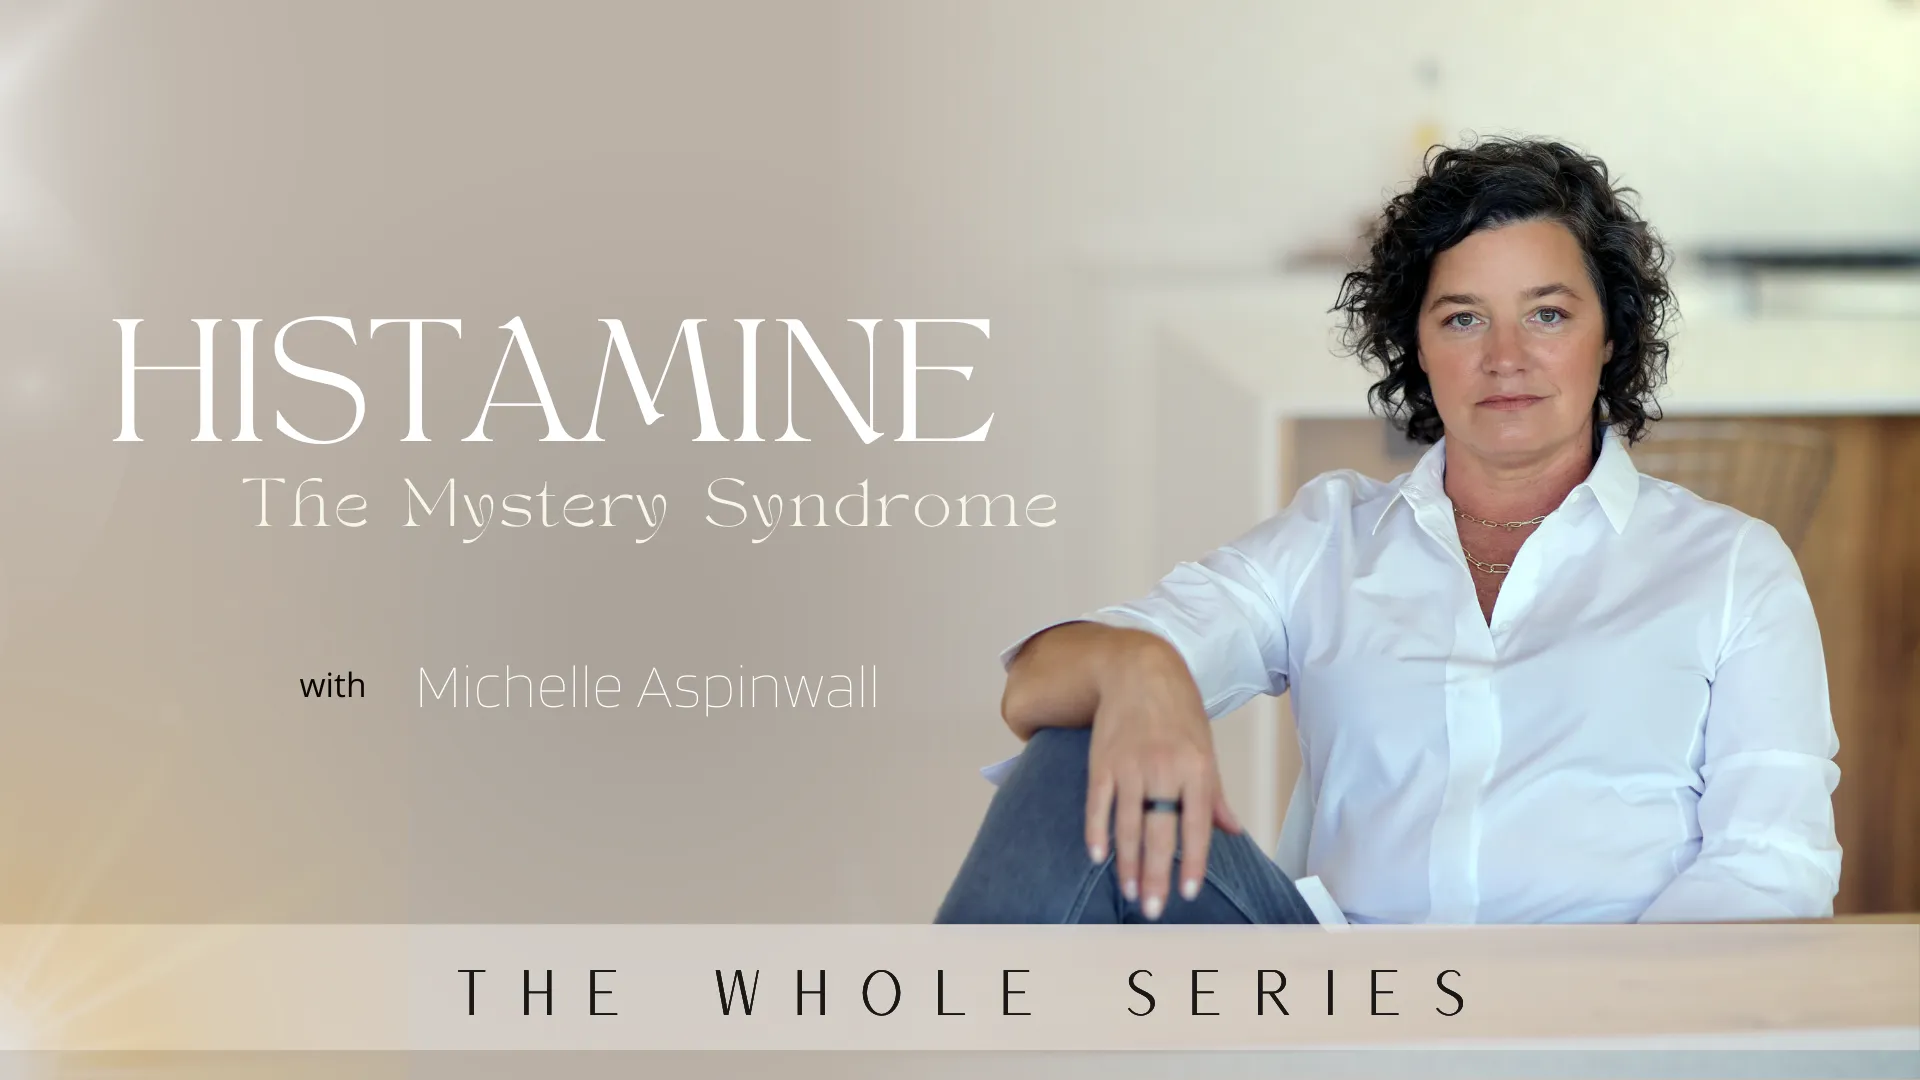 The Mystery Syndrome - HISTAMINE 